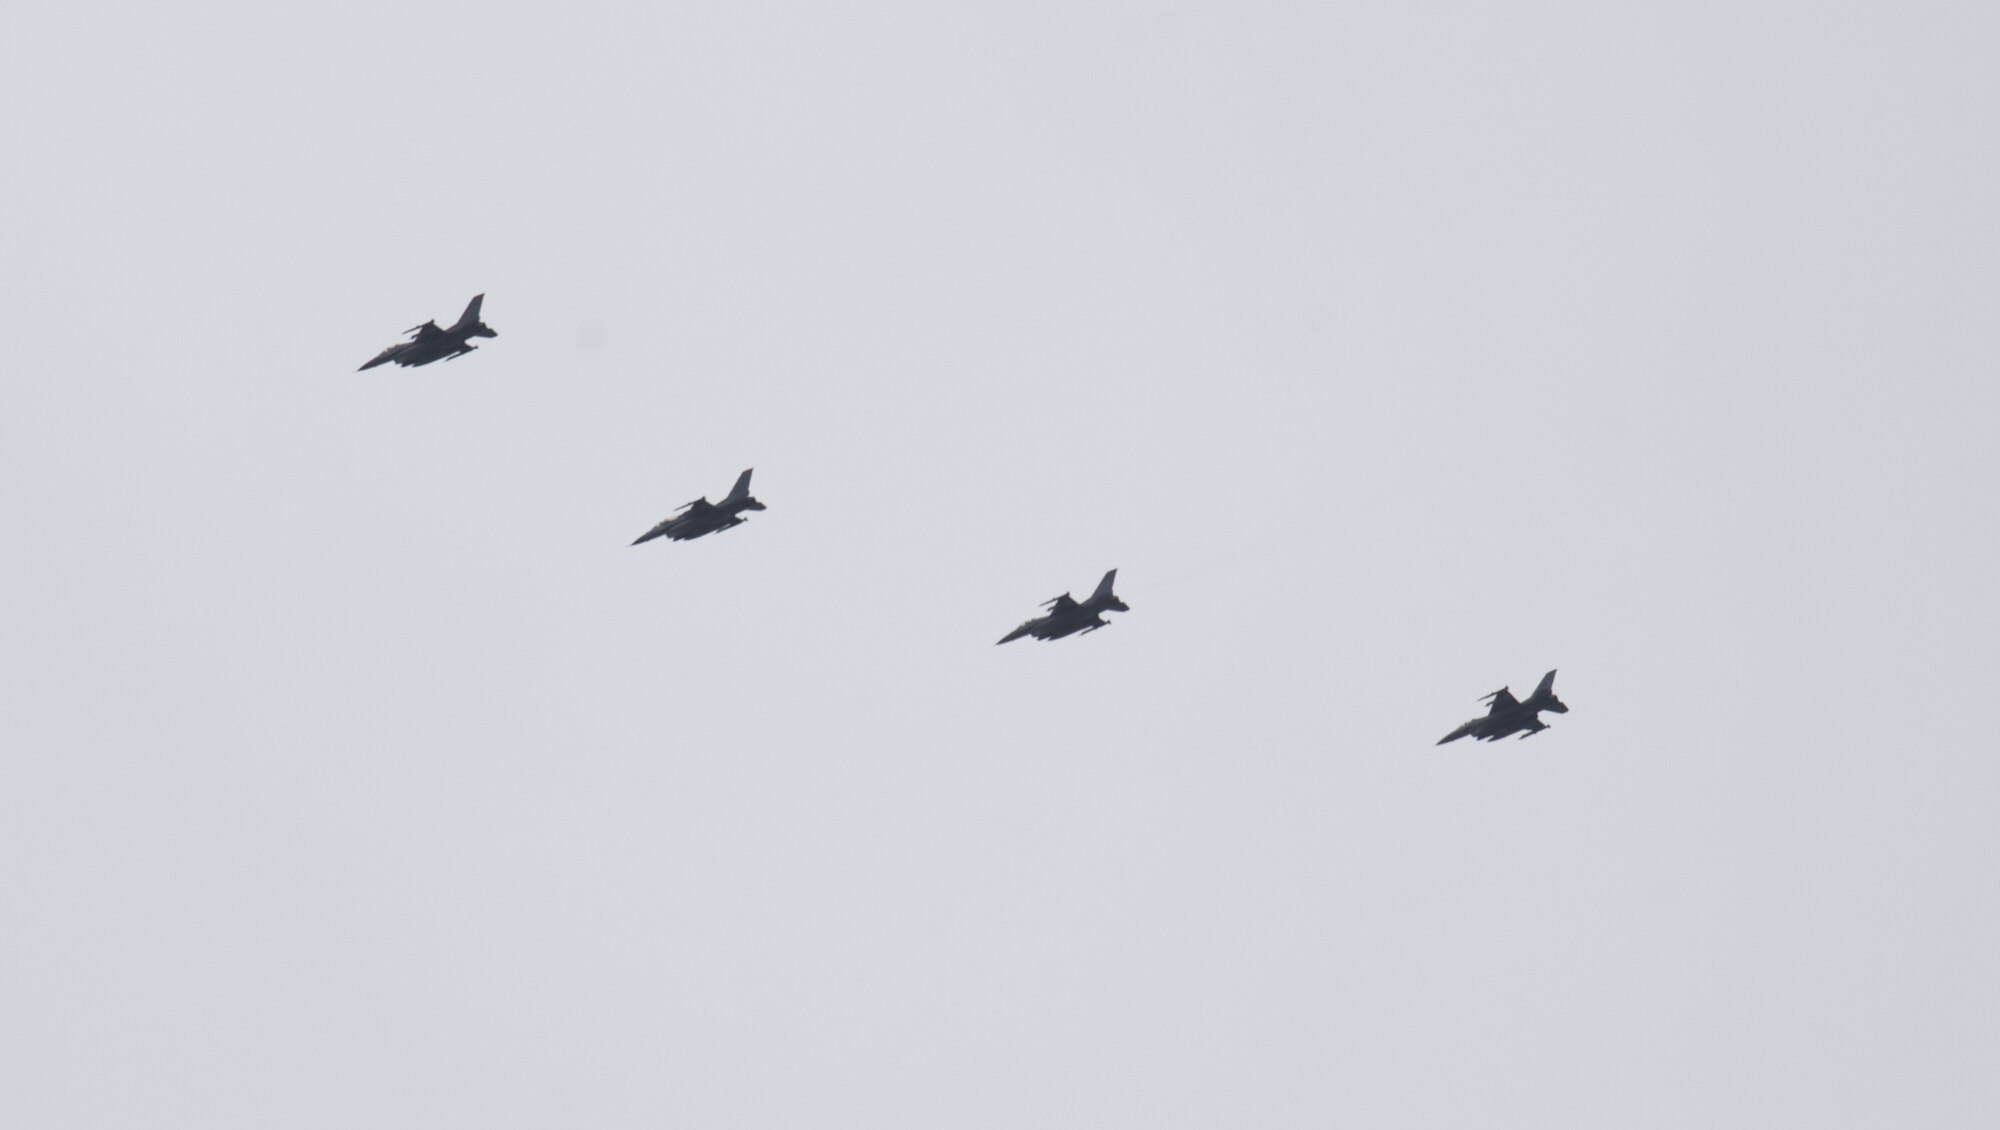 Four U.S. Air Force F-16 Fighting Falcons, assigned to Misawa Air Base, Japan, fly in formation after executing Exercise PACIFIC WEASEL, Friday, March 27, 2020. Each PAC WEASEL involves different assets and units. This exercise’s iteration included F-16s from the 13th and 14th Fighter Squadrons, command and control assets assigned to the 610th Air Control Flight, and surface-to-air missile simulators from the Japanese Ground Self Defense Force 101st Antiaircraft Artillery Unit from Camp Hachinohe.  (U.S. Air Force photo by Tech. Sgt. Chris Jacobs)